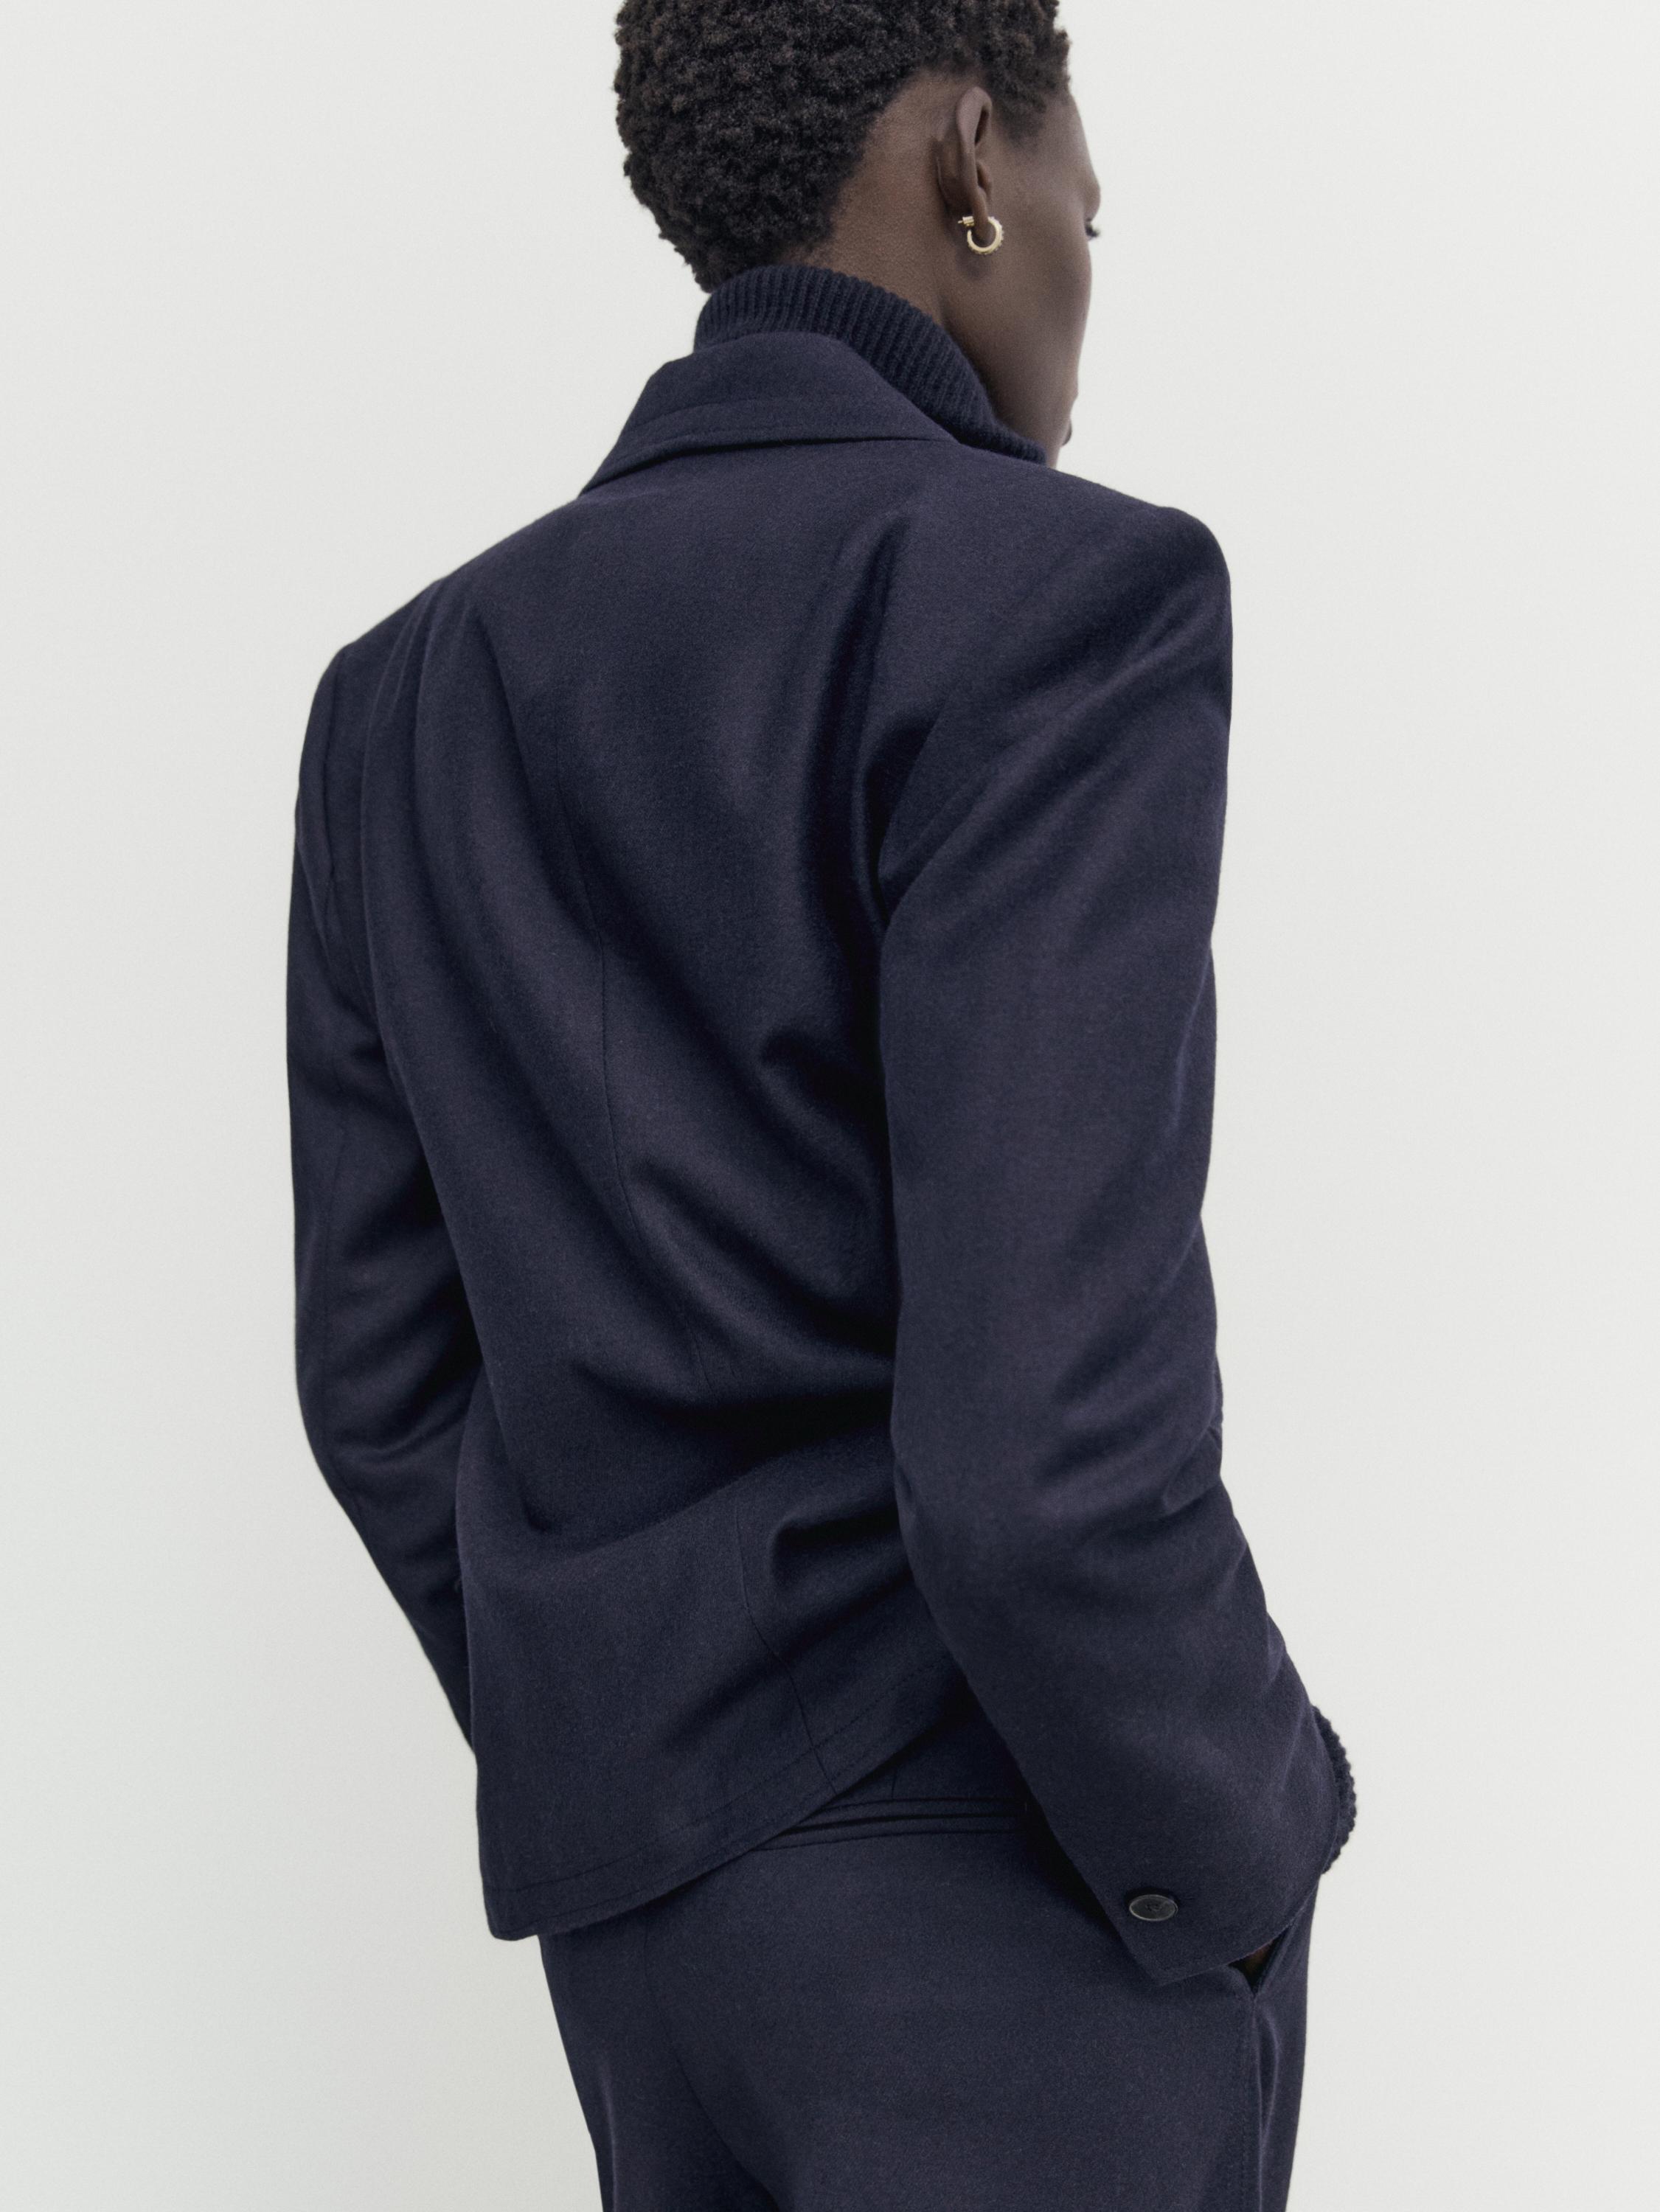 Navy blue straight suit trousers - Navy blue | ZARA United States